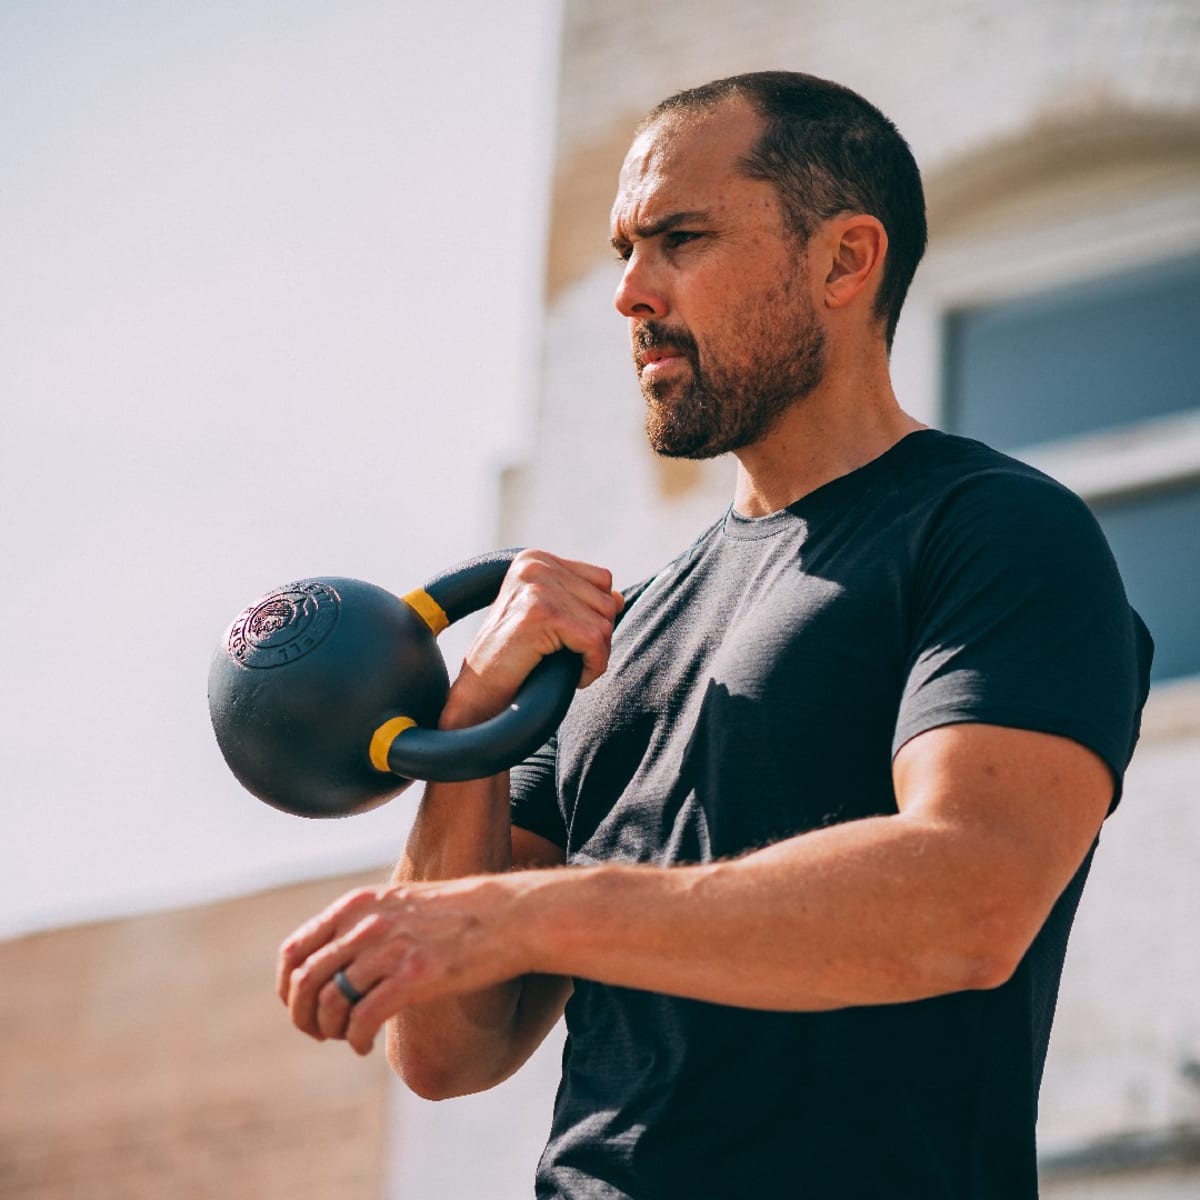 Kettlebell workout for weight loss: 6 full body moves